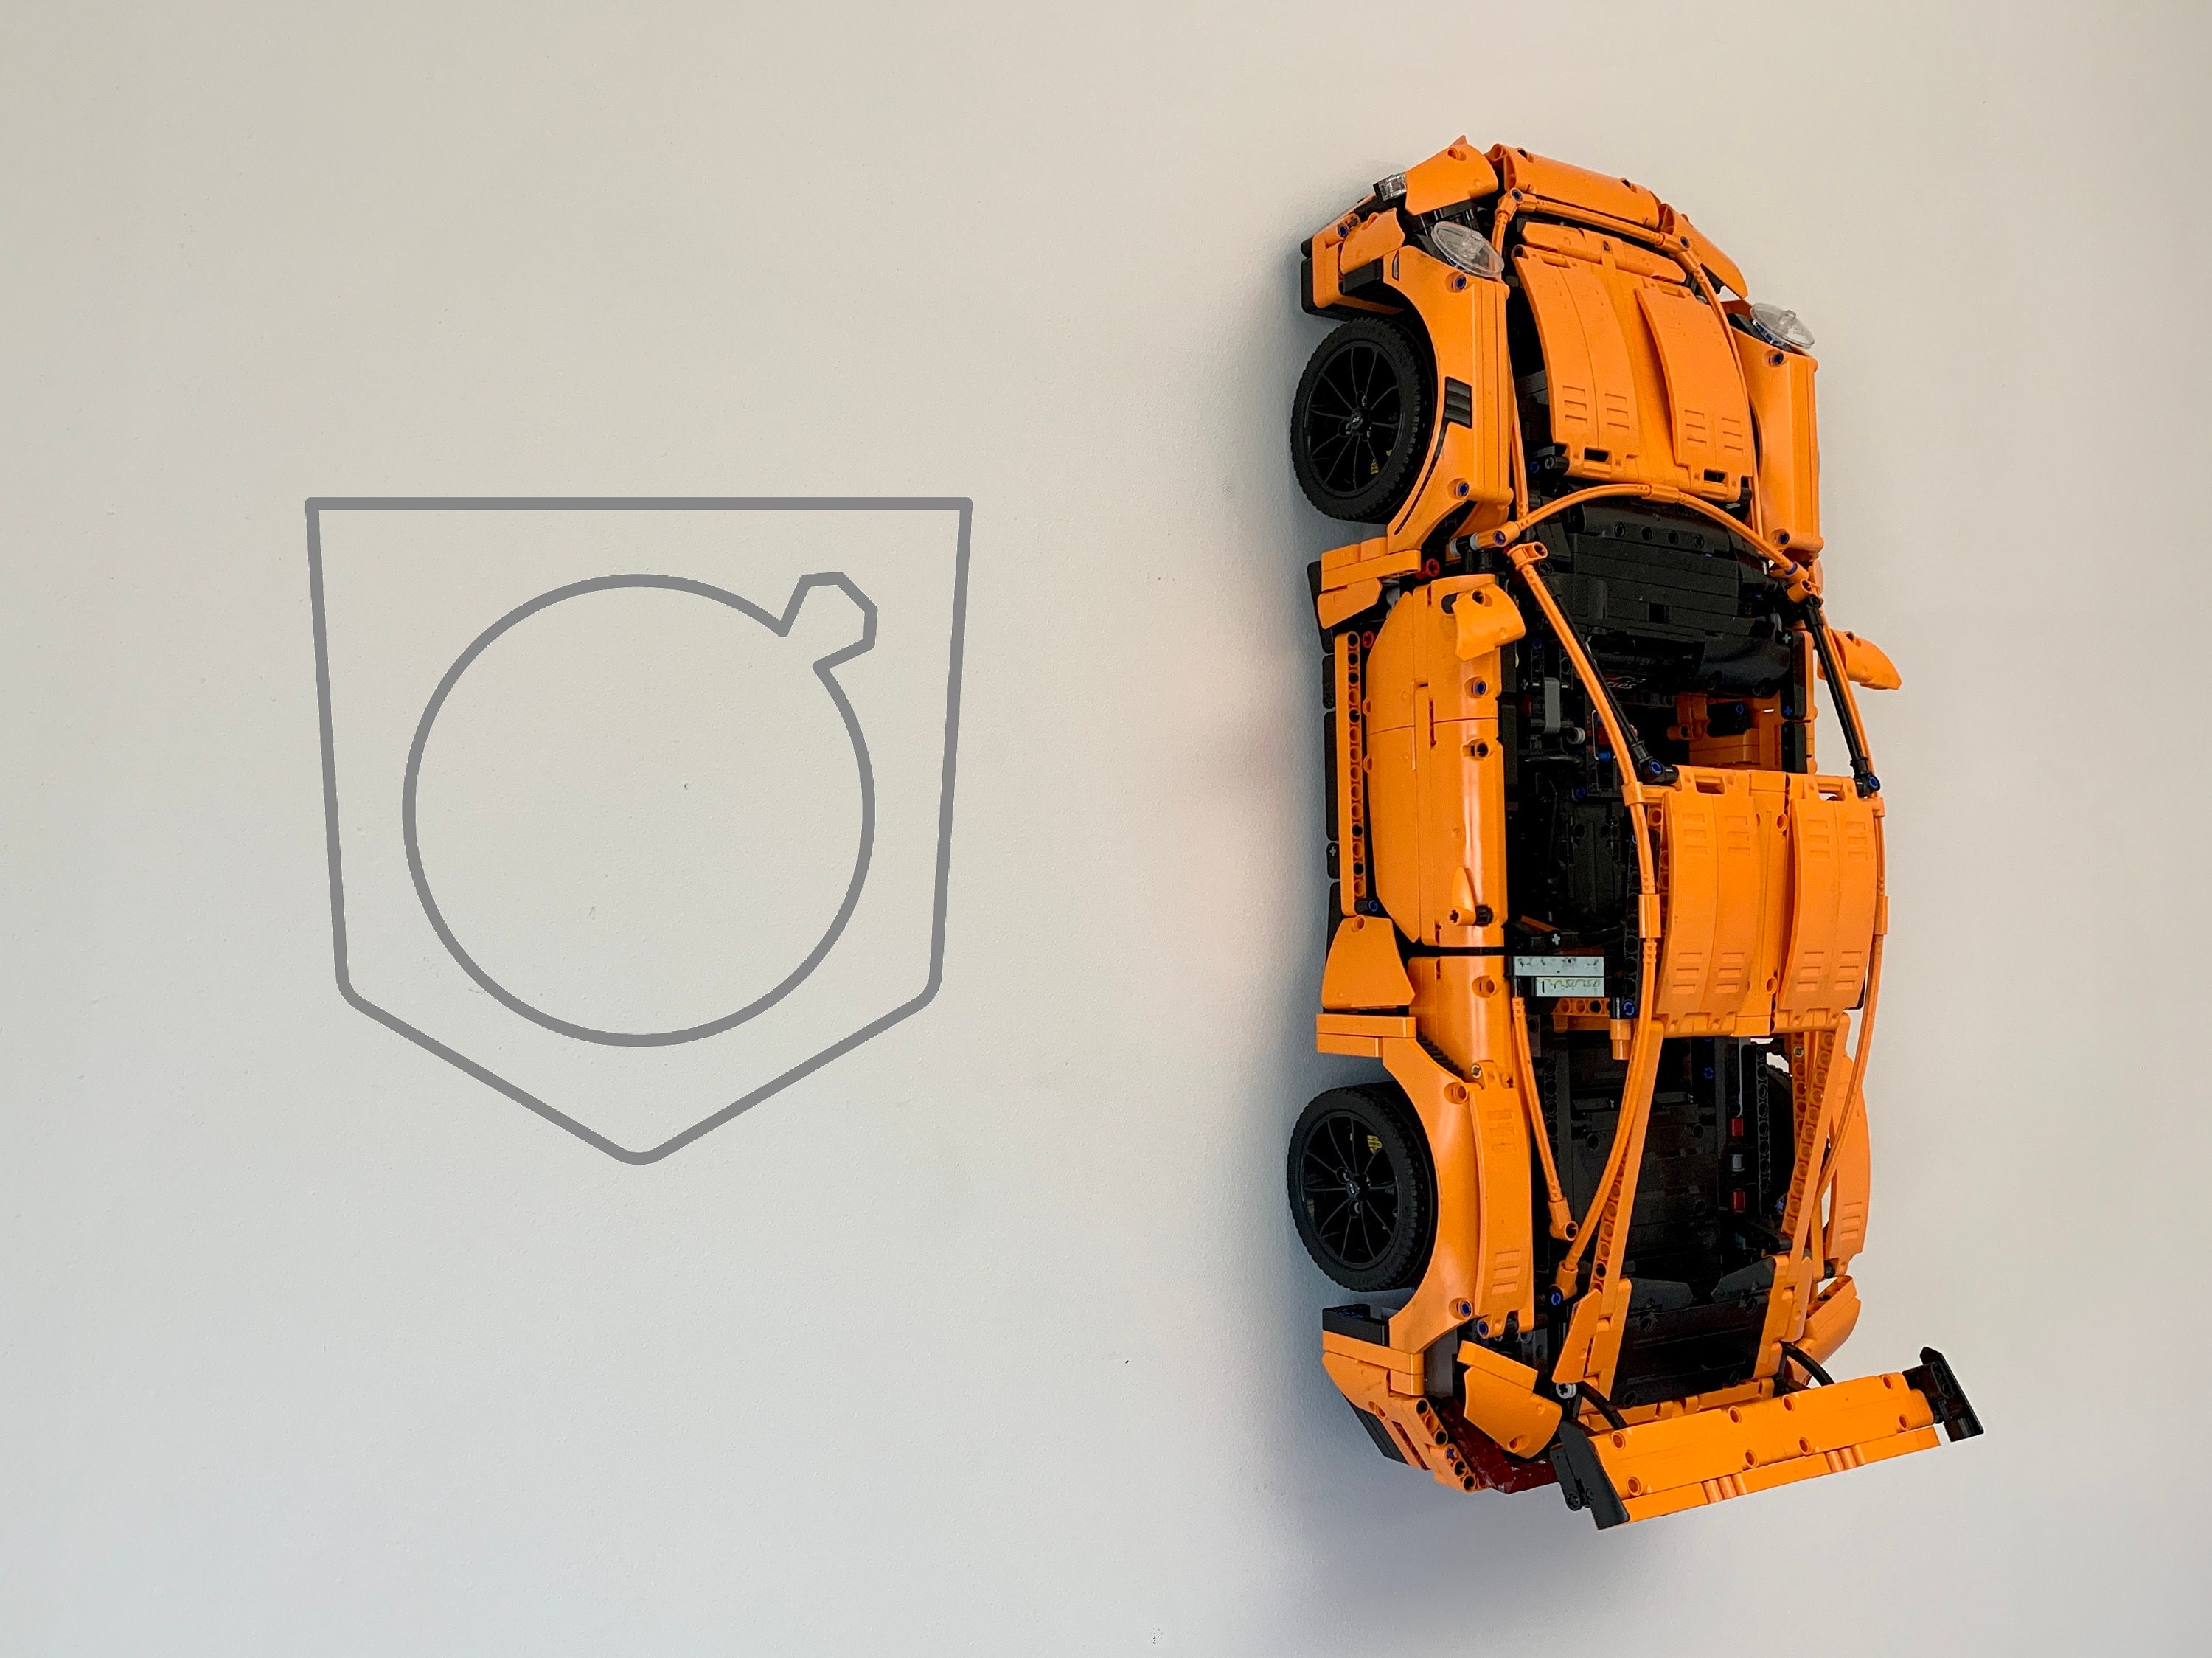 You will spend hours playing with this Lego Porsche 911 GT3 RS